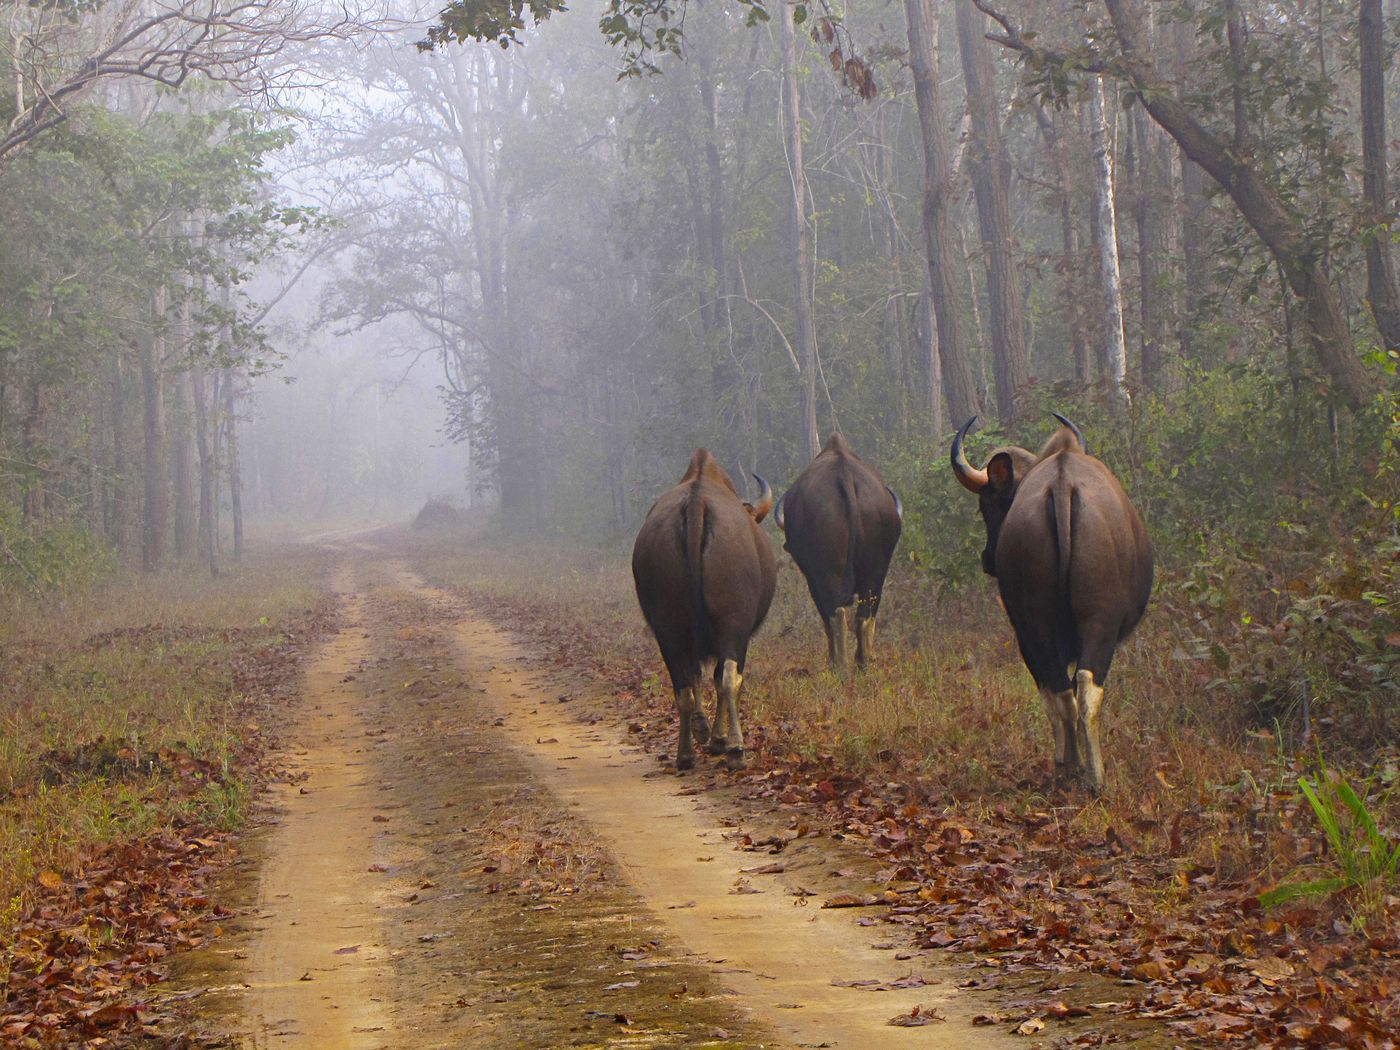 Three Indian bison, or gaur in Kanha National Park in central Indian state of Madhya Pradesh.